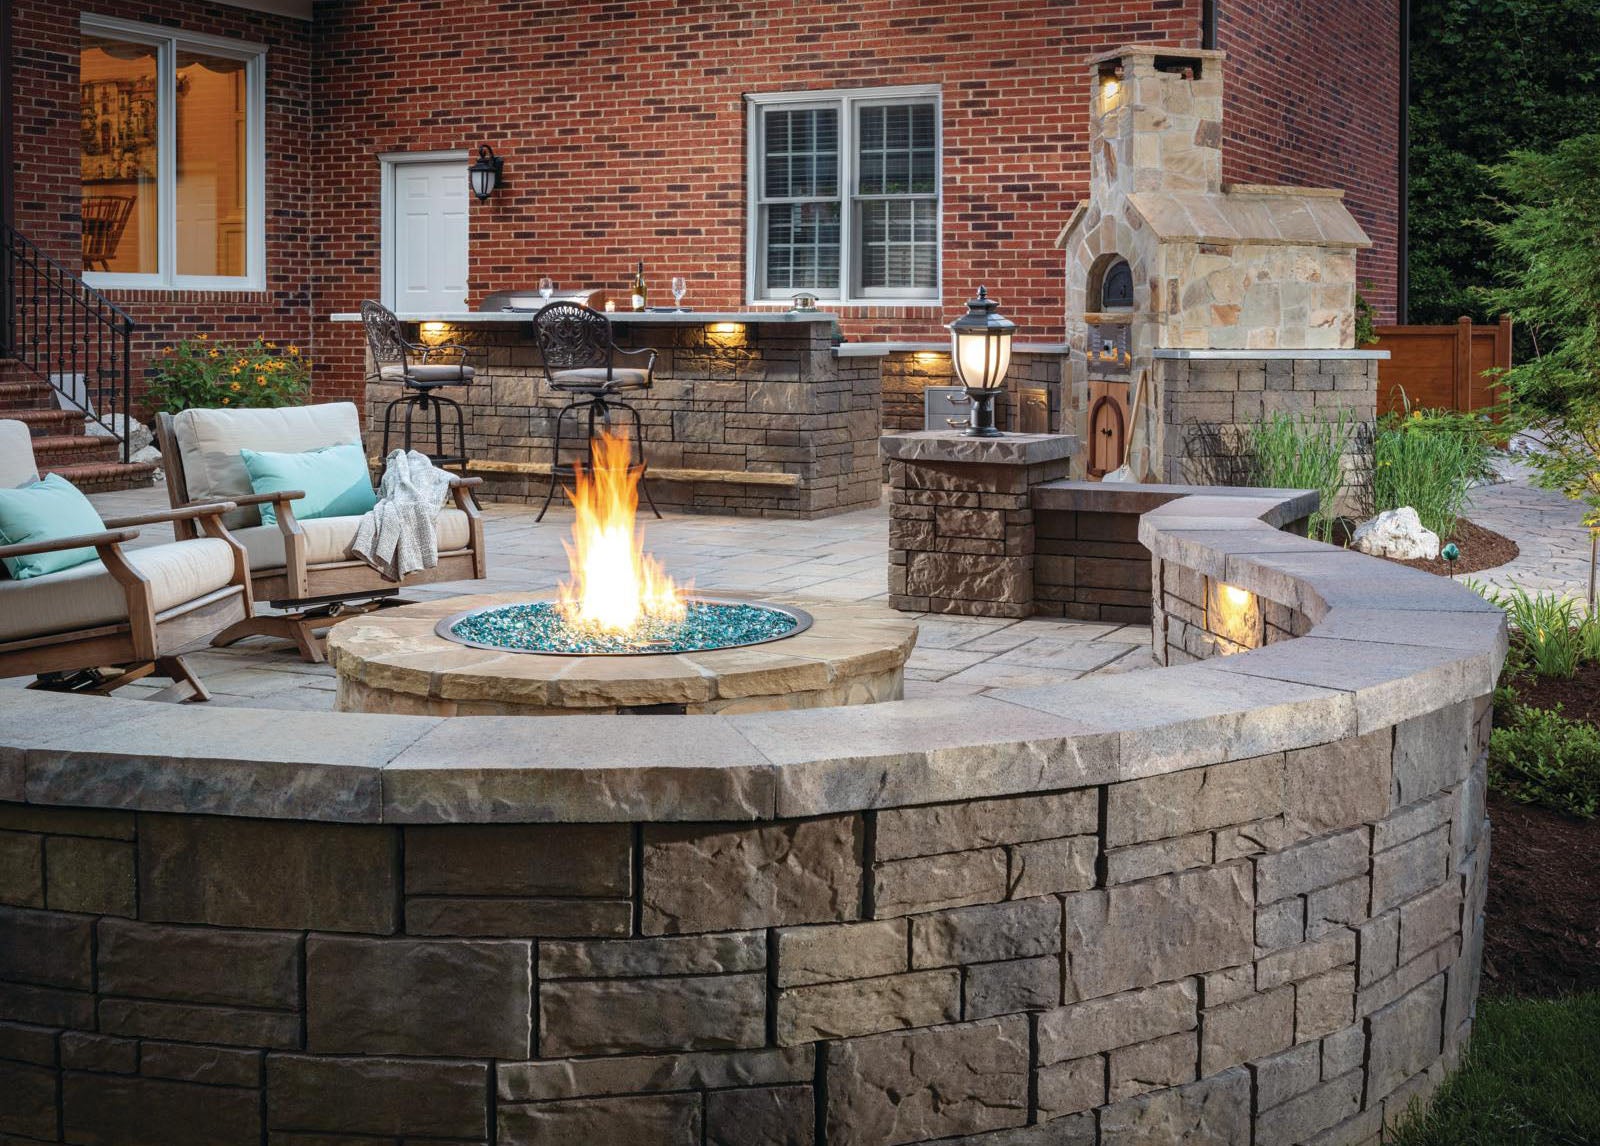 Designing A Patio Around Fire Pit, Small Backyard Ideas With Fire Pit